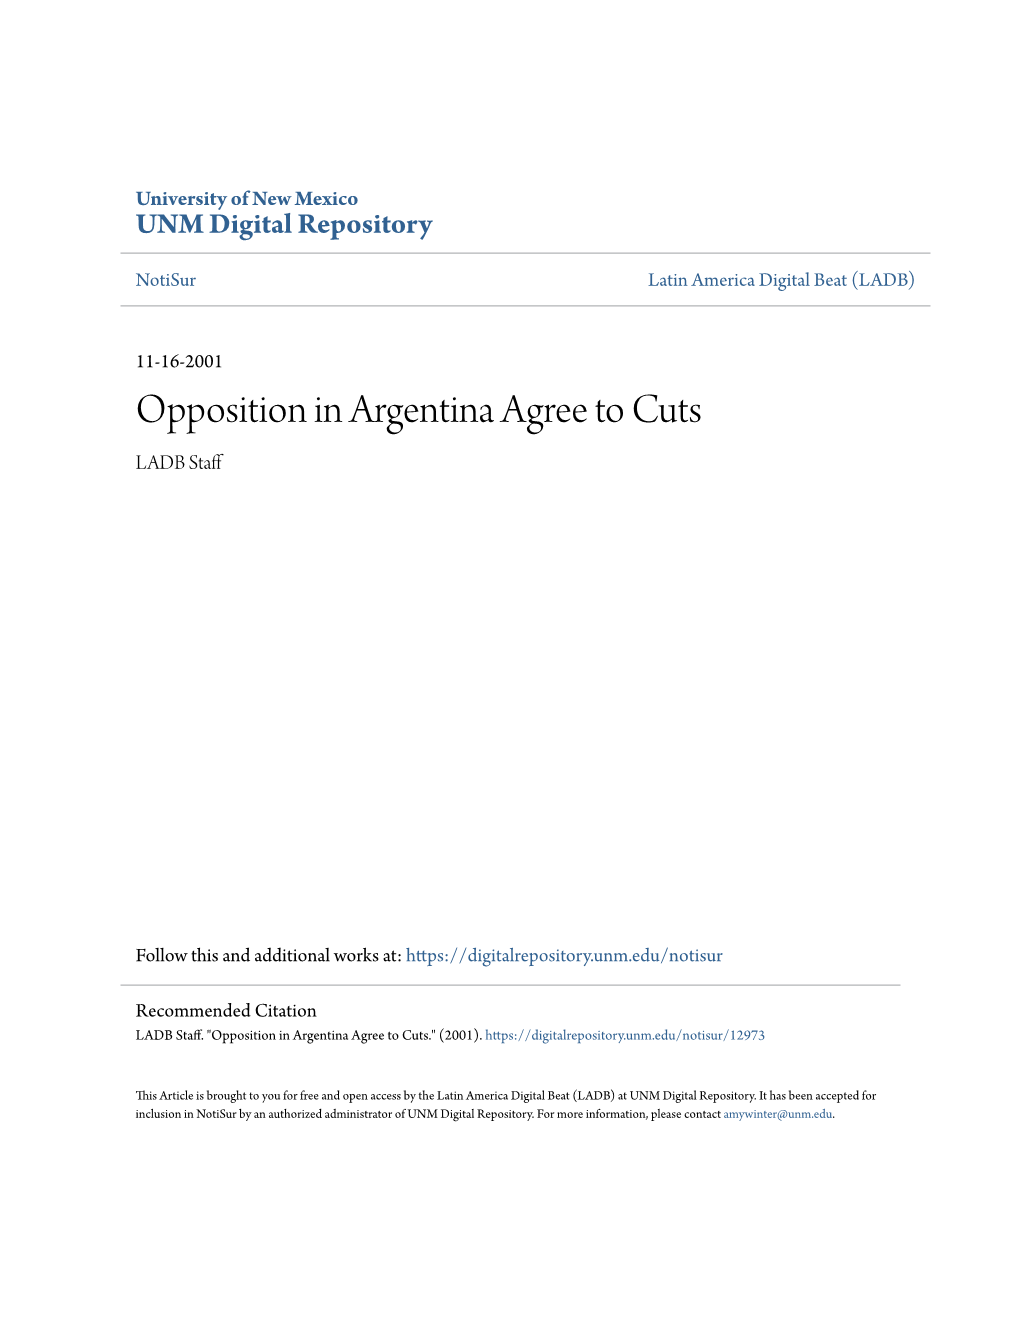 Opposition in Argentina Agree to Cuts LADB Staff